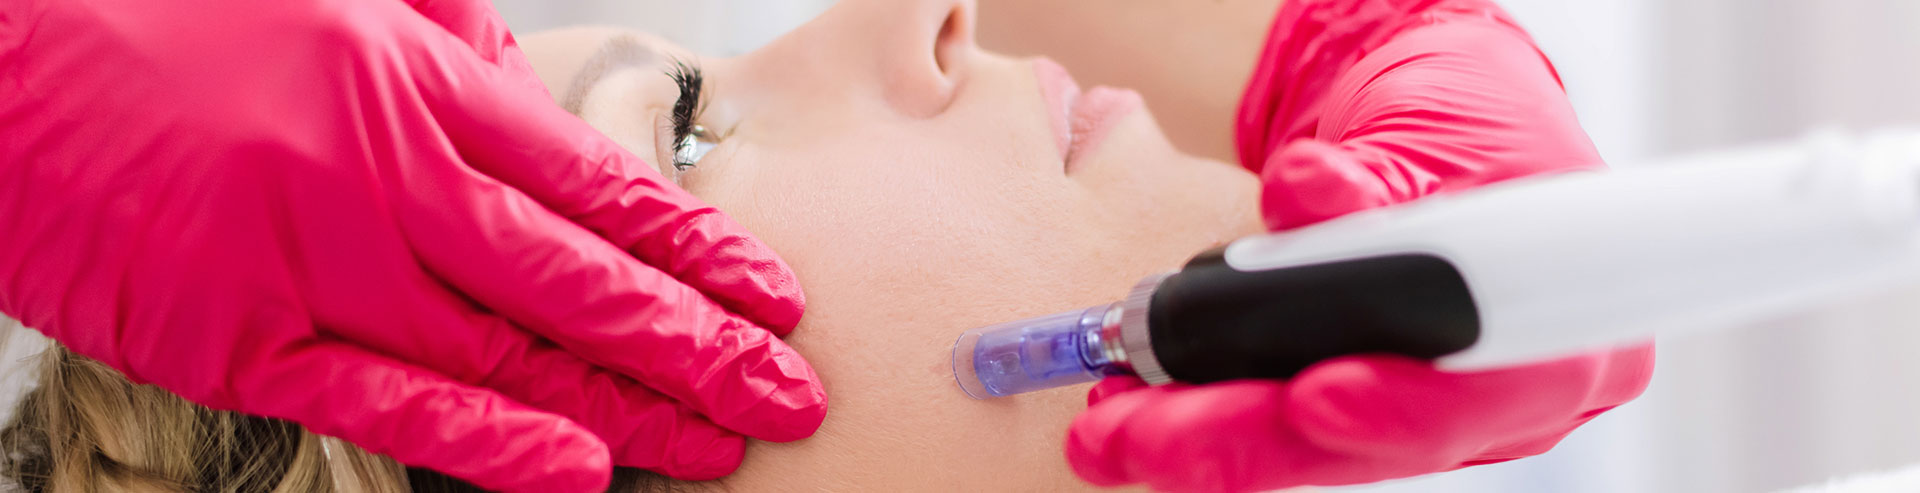 A woman is having collagen pin microneedling treatment